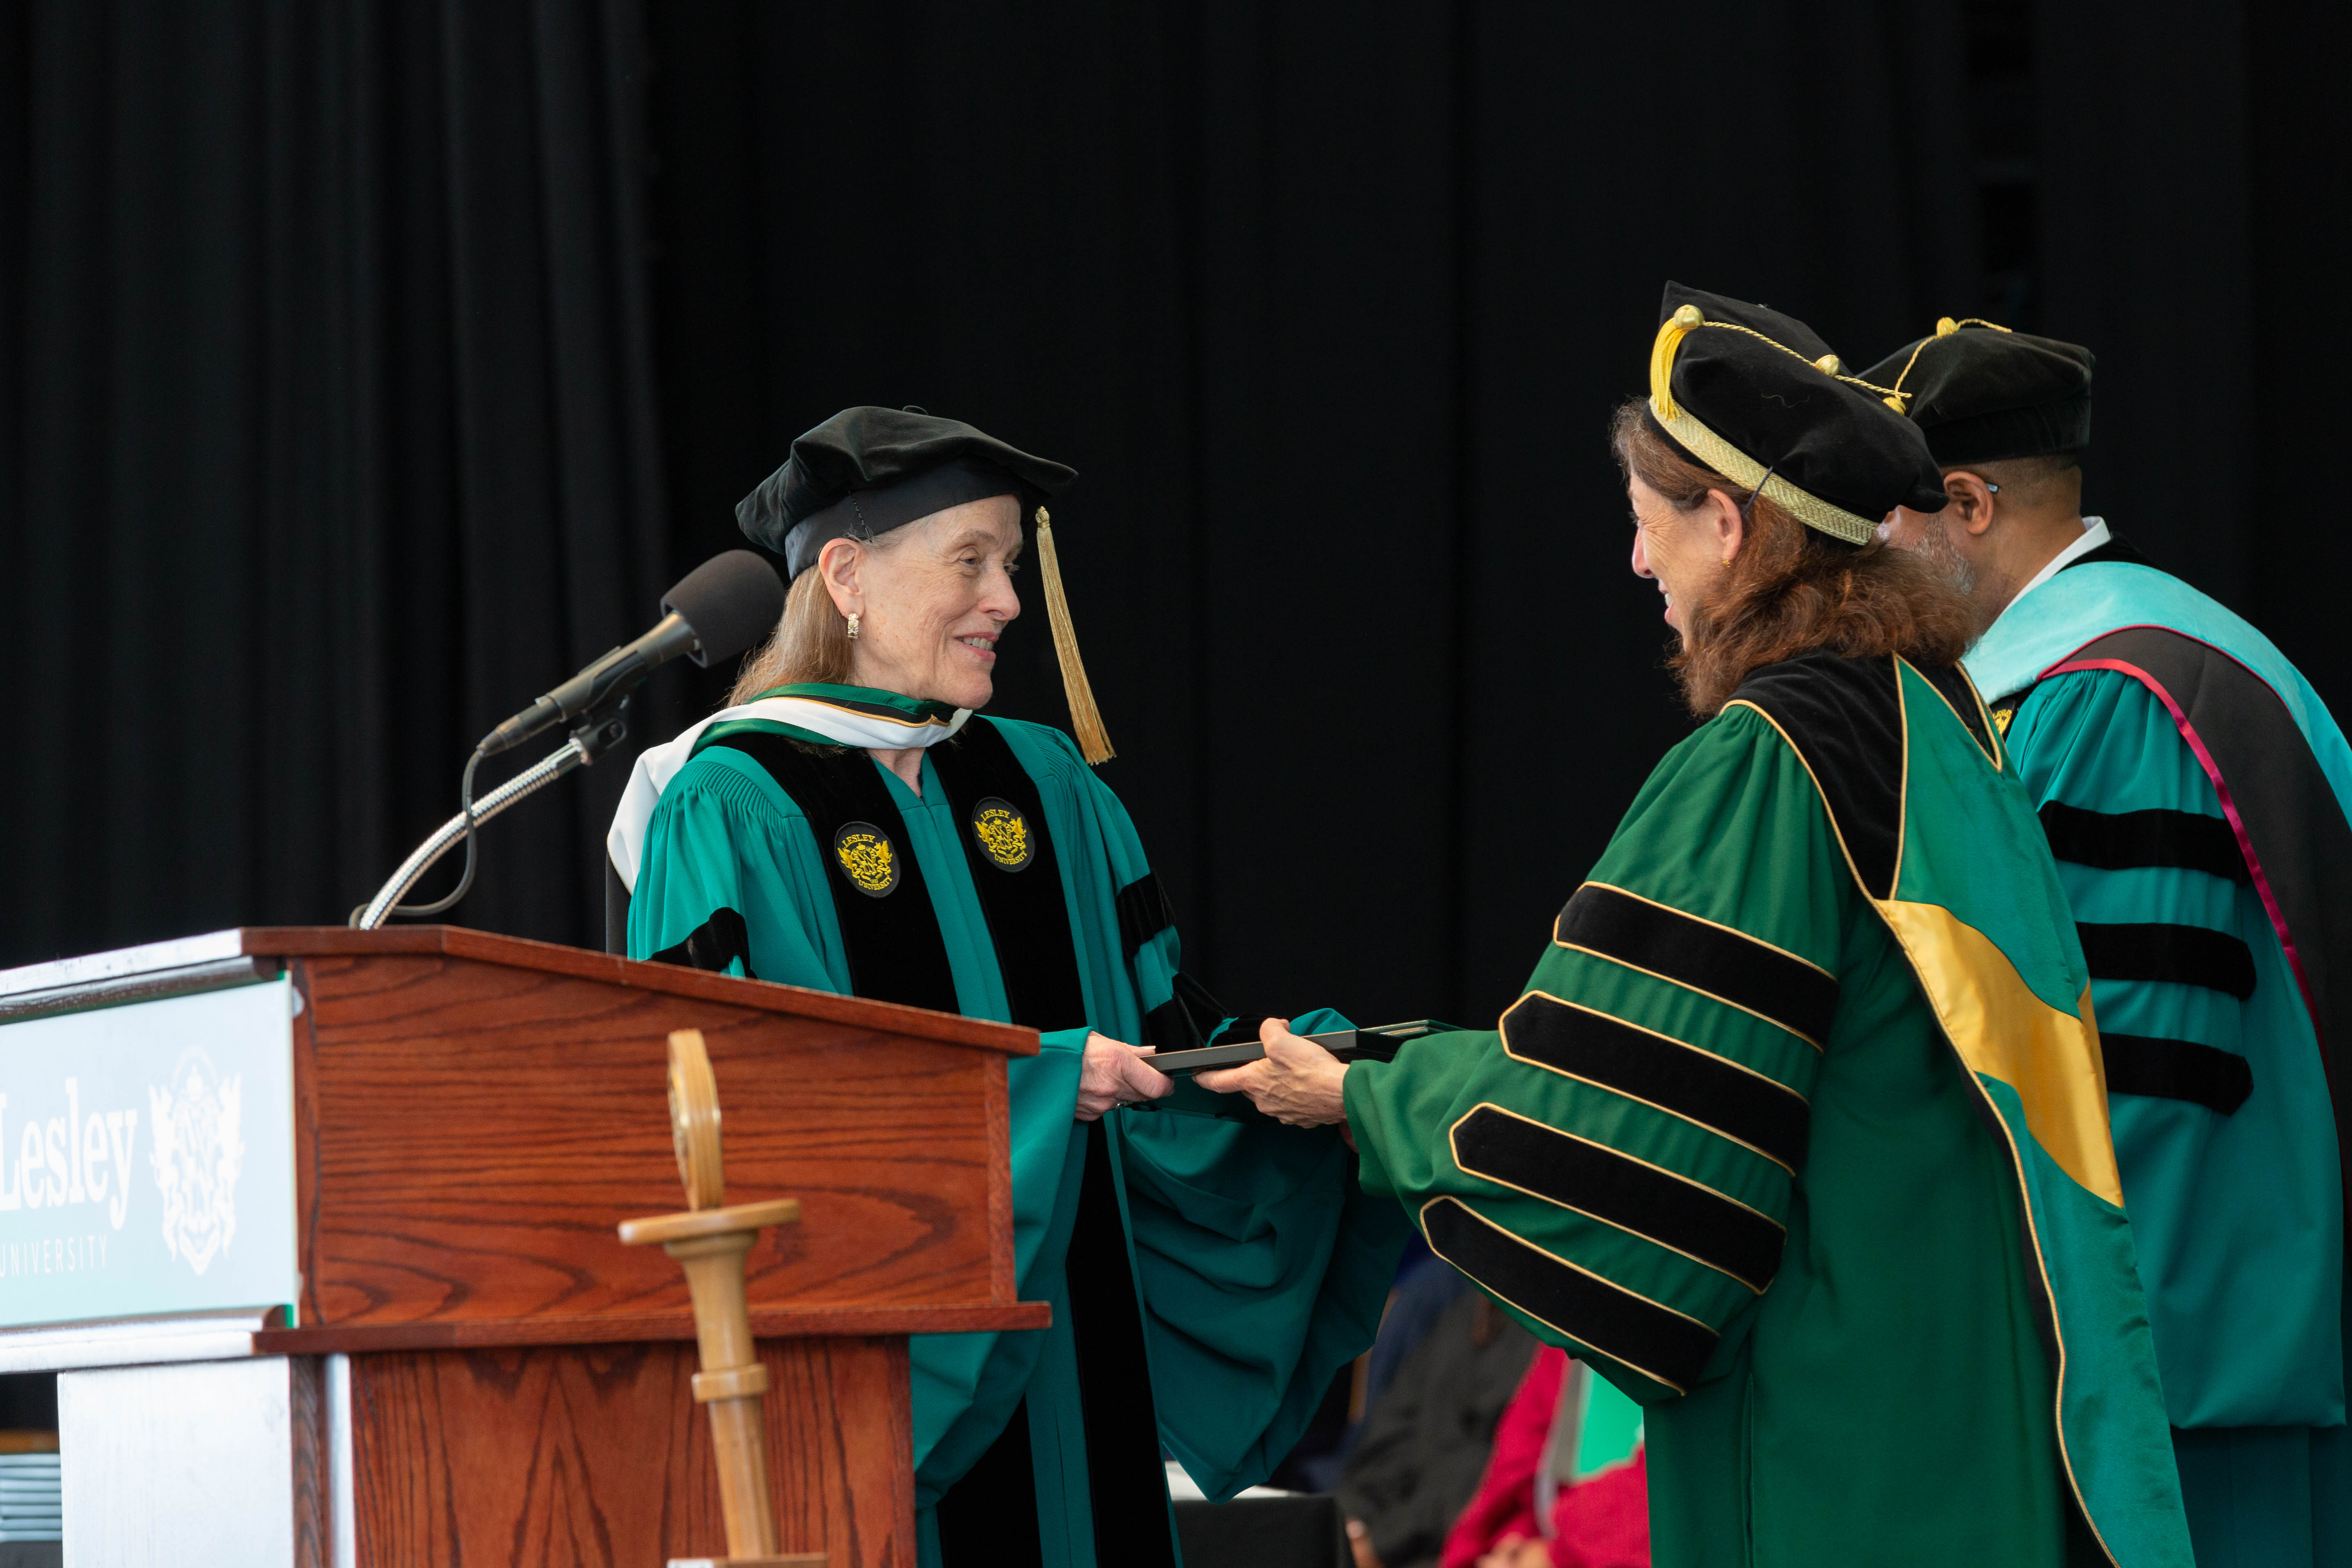 Libby Parker receives honorary degree